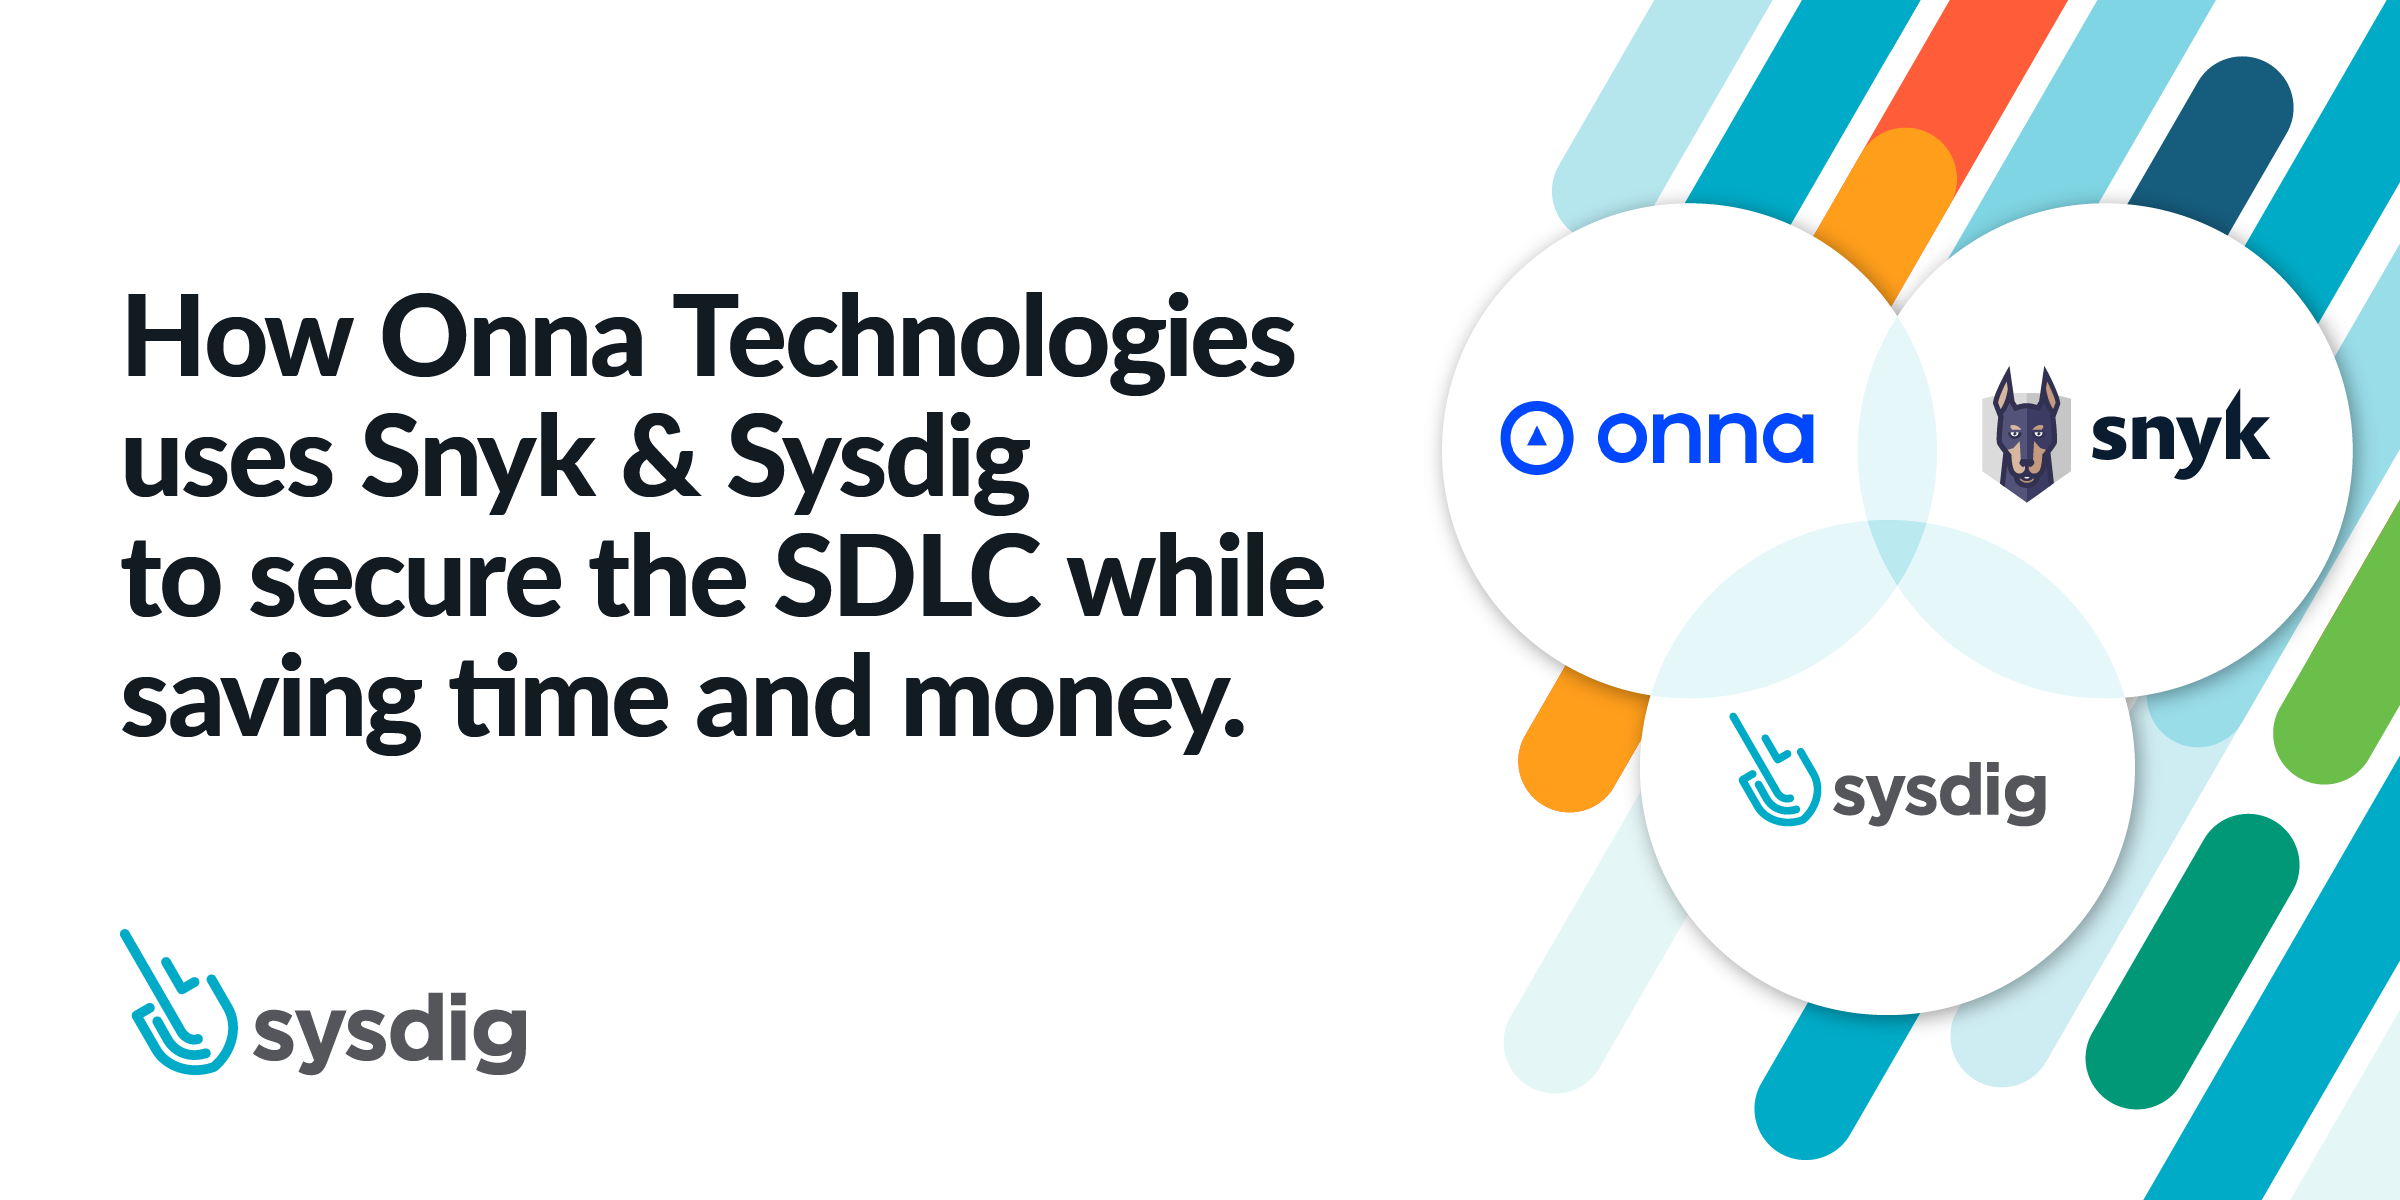 How Onna Technologies uses Snyk & Sysdig to secure the SDLC while saving time and money. On the right side, there are three logos: Onna, Snyk, and Sysdig inside bubbles. Another Sysdig logo sits in the lower left corner.